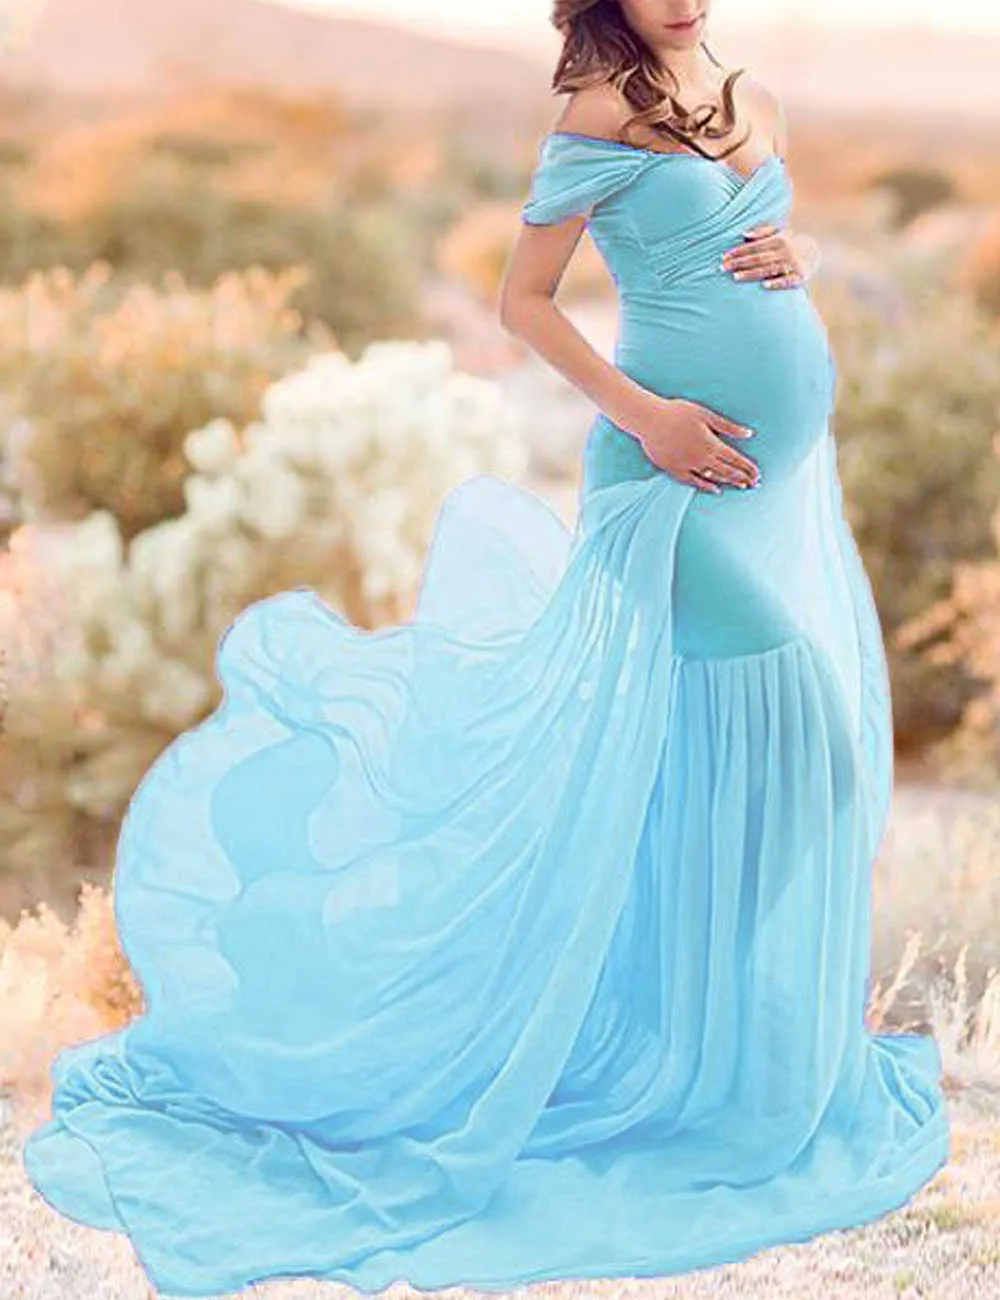 2019 Sexy Maternity Dresses Photography Props Off Shoulder Women Pregnancy Dress For Photo Shooting New Tail Maxi Maternity Gown (4)